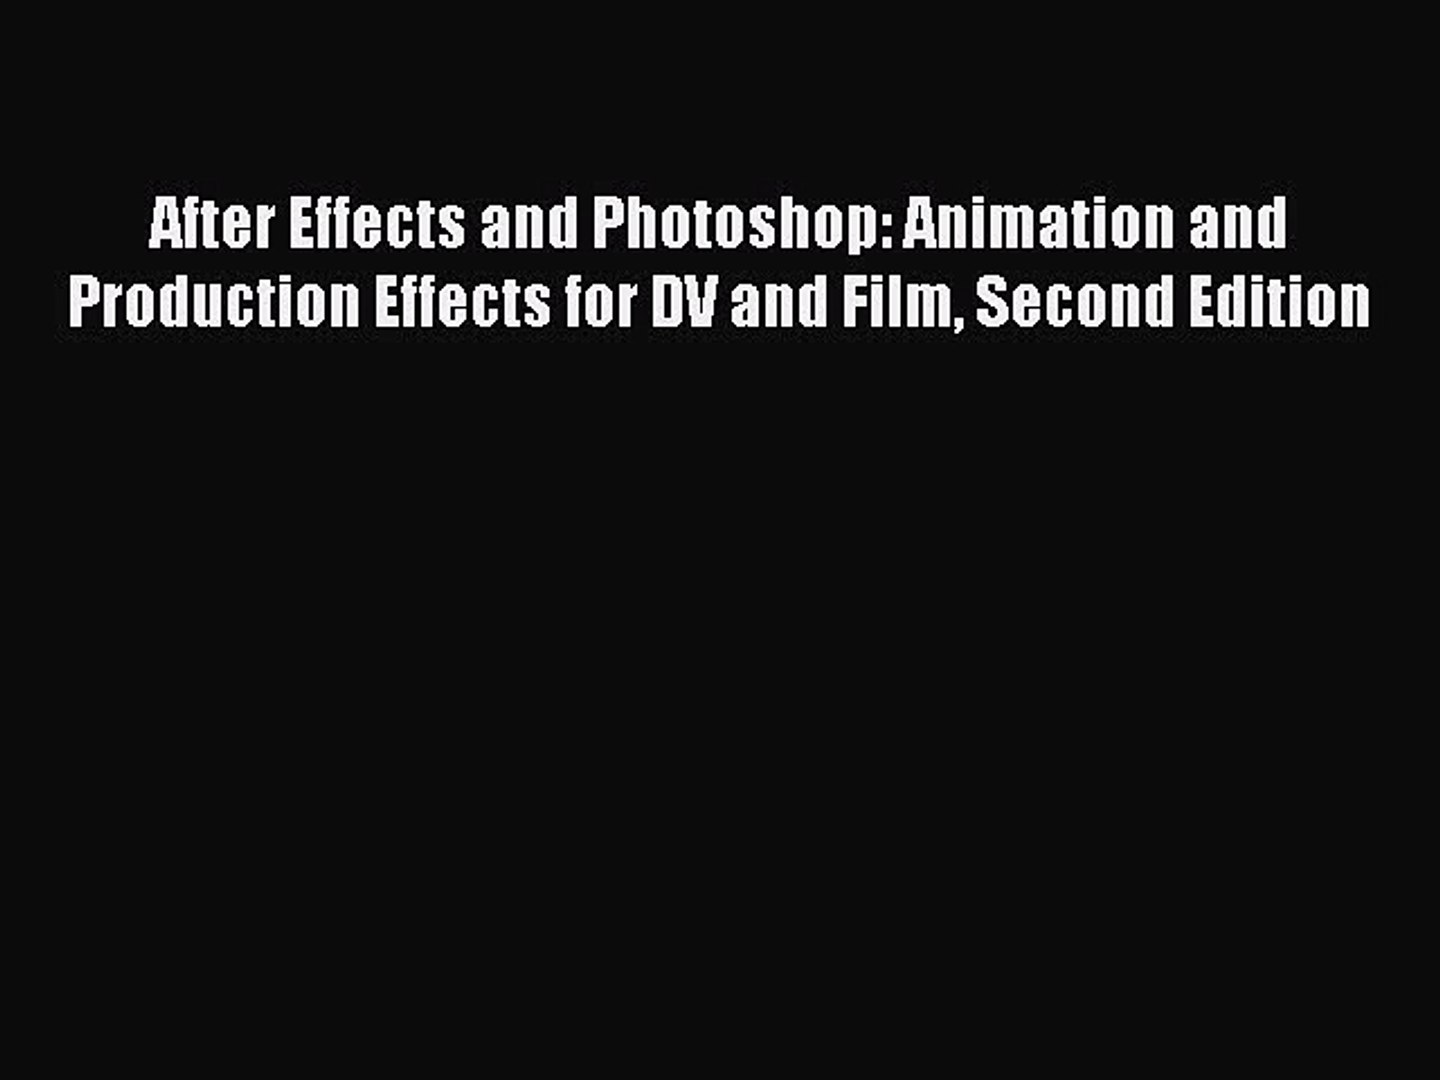 Read After Effects and Photoshop: Animation and Production Effects for DV and Film Second Edition